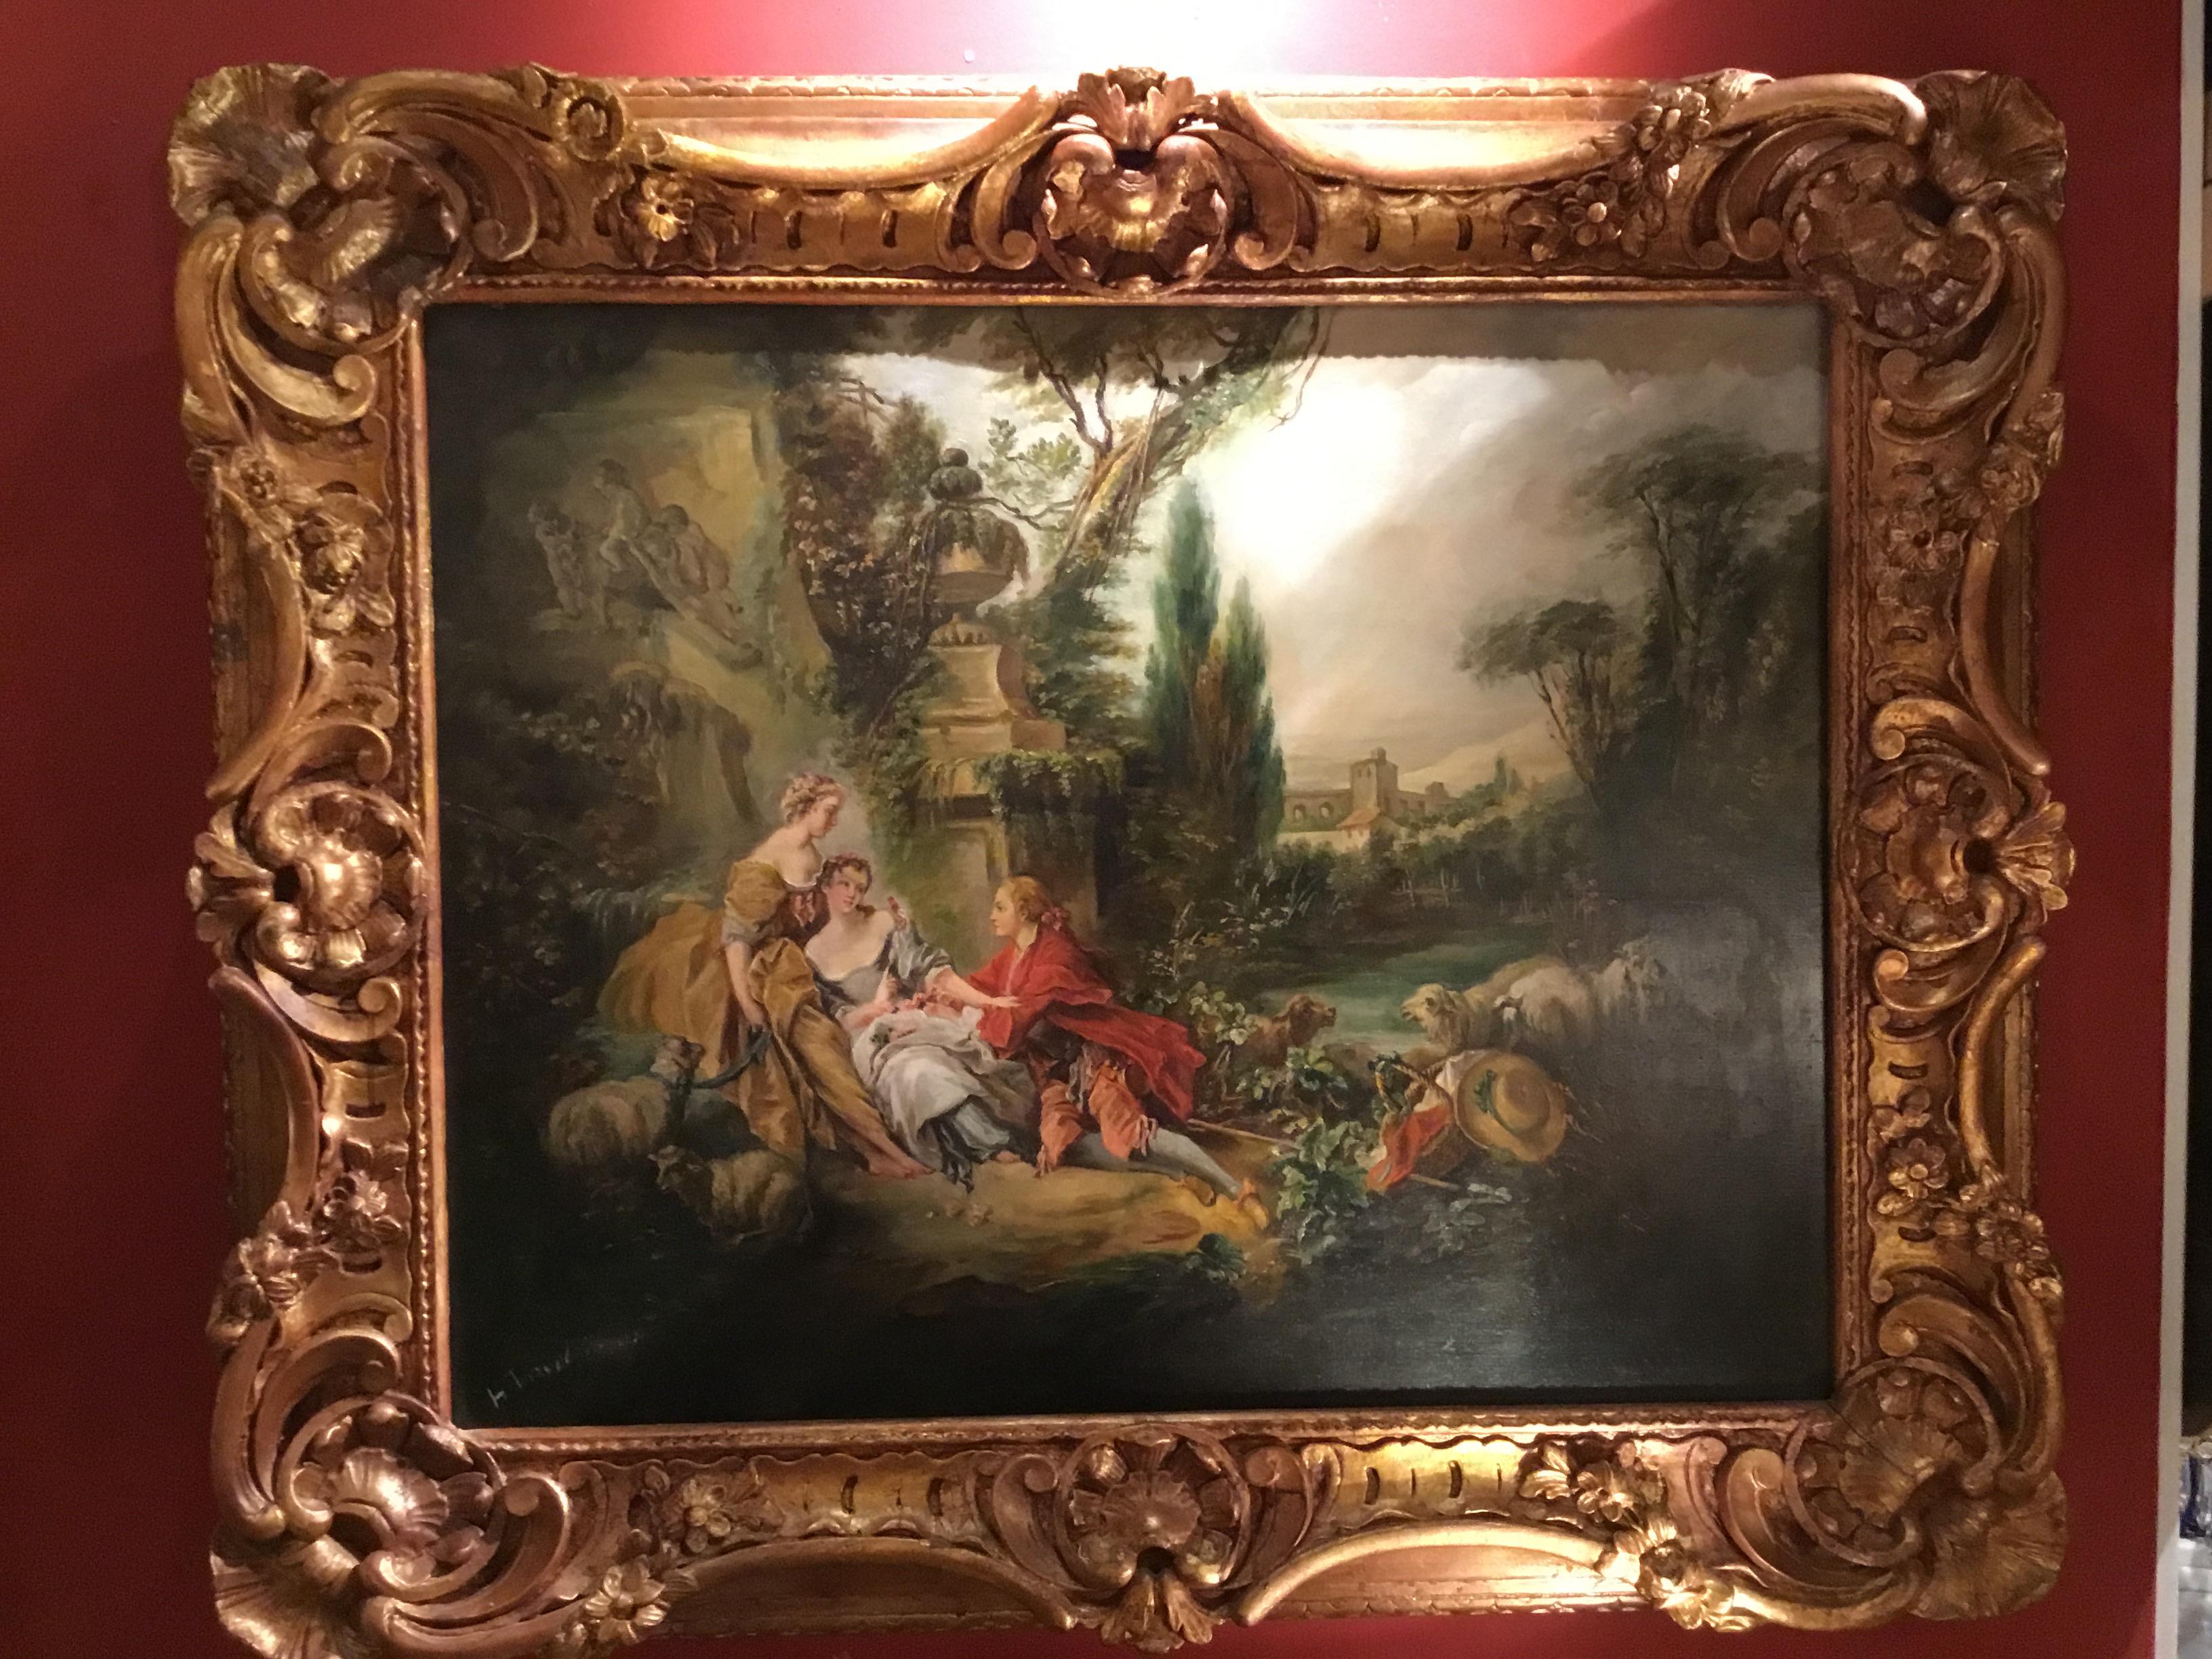 Pair of exquisite paintings after Francois Boucher. Signed illegibly in lower left. The frames
Are heavily carved and gilt in a medium tone gold. Boucher was a highly
Admired artist of the 18th century. His work was very popular with the